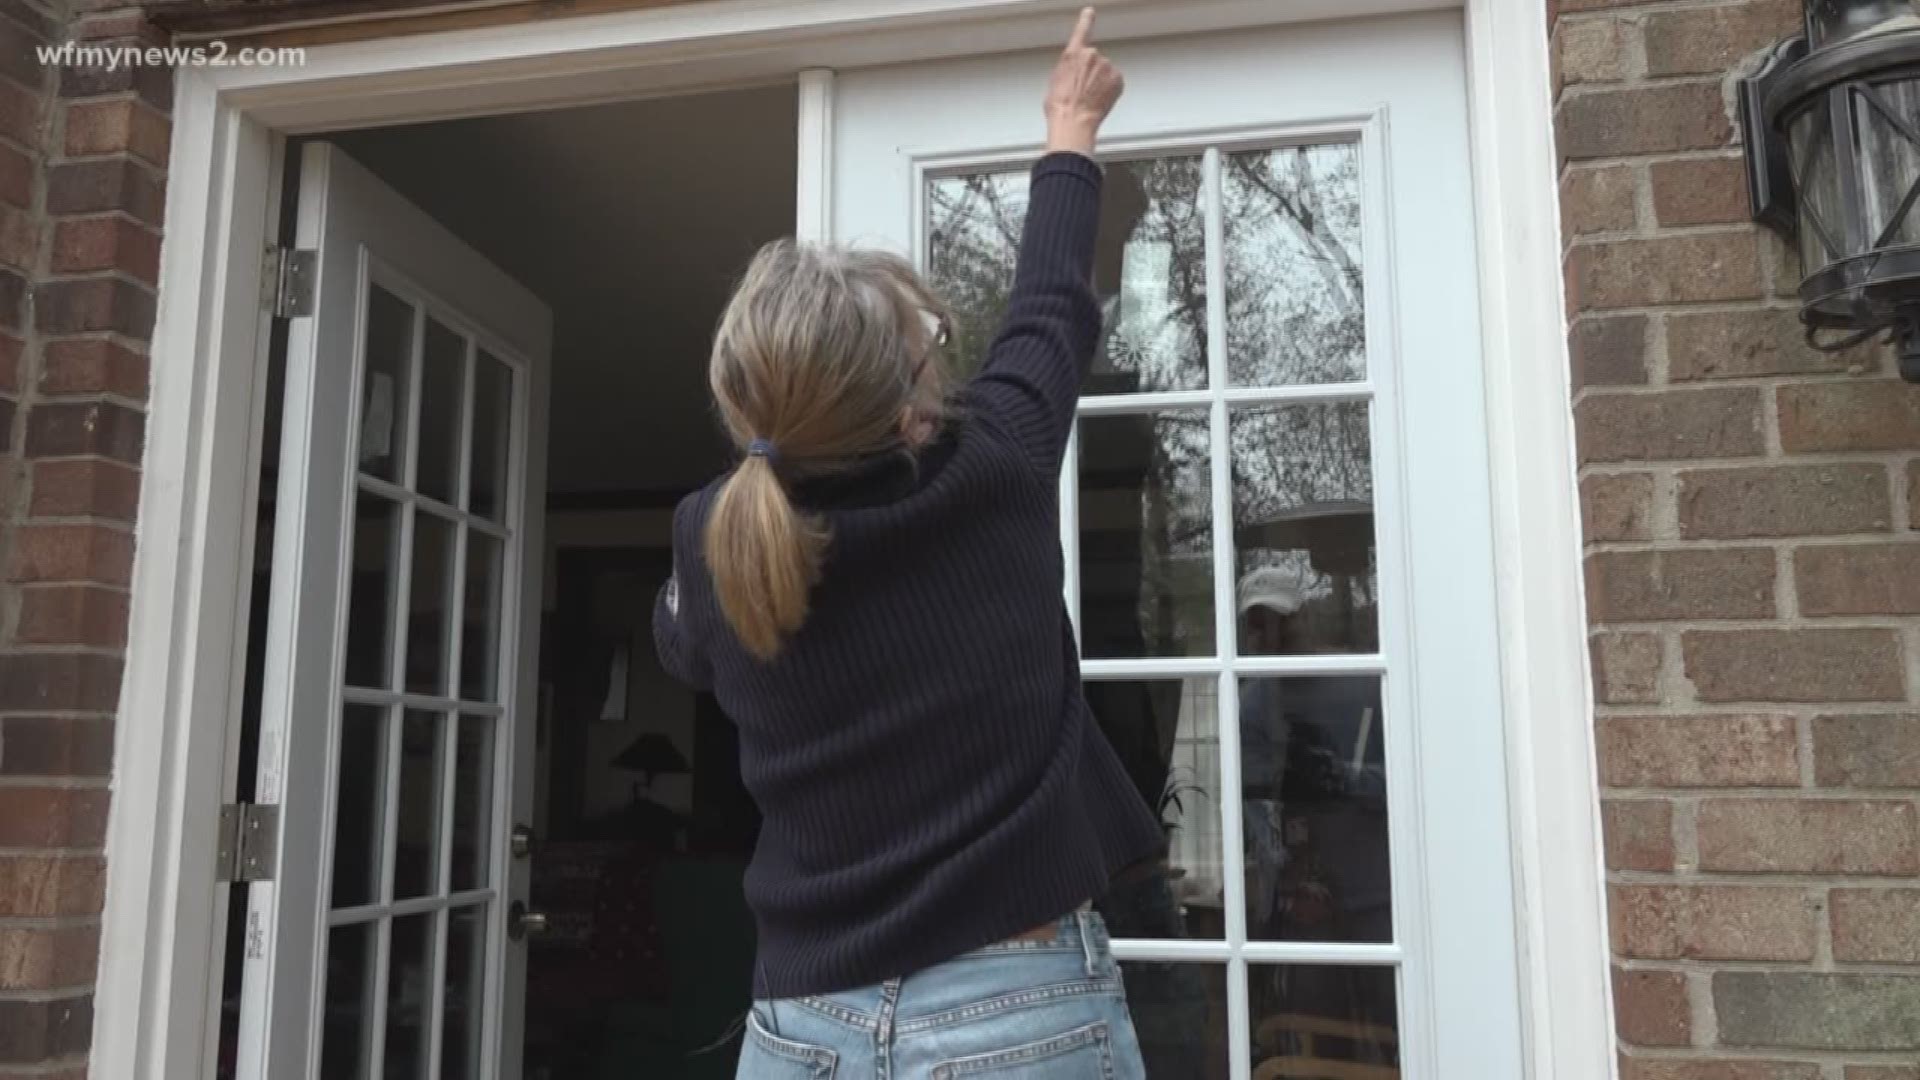 The Greensboro woman ordered custom French doors, but once they were installed that custom price didn't match the installation.